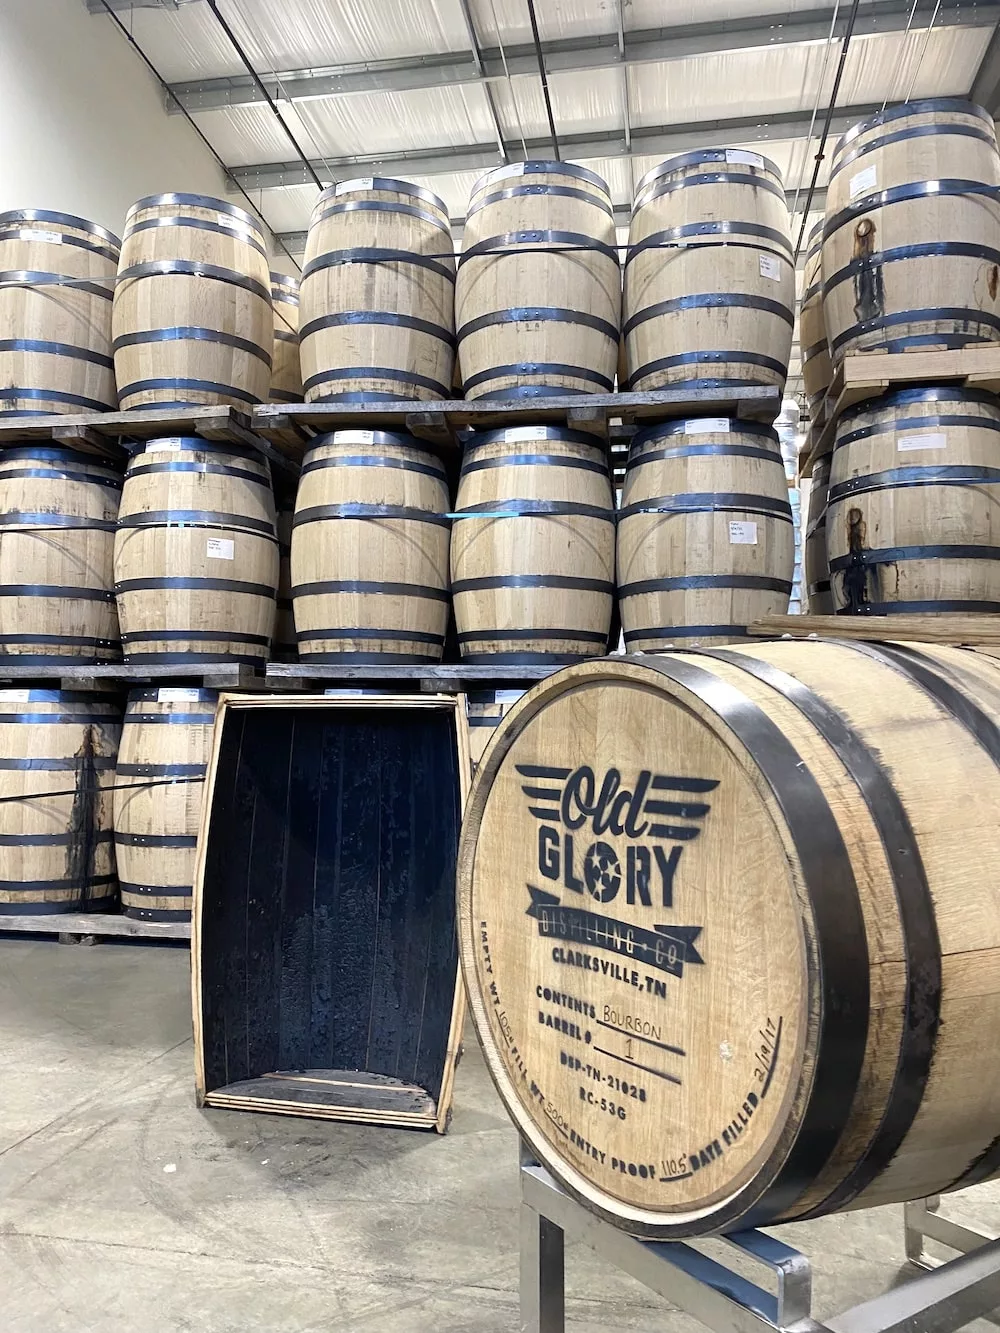 Barrels at Old Glory Distilling Co. in Clarksville, Tennessee